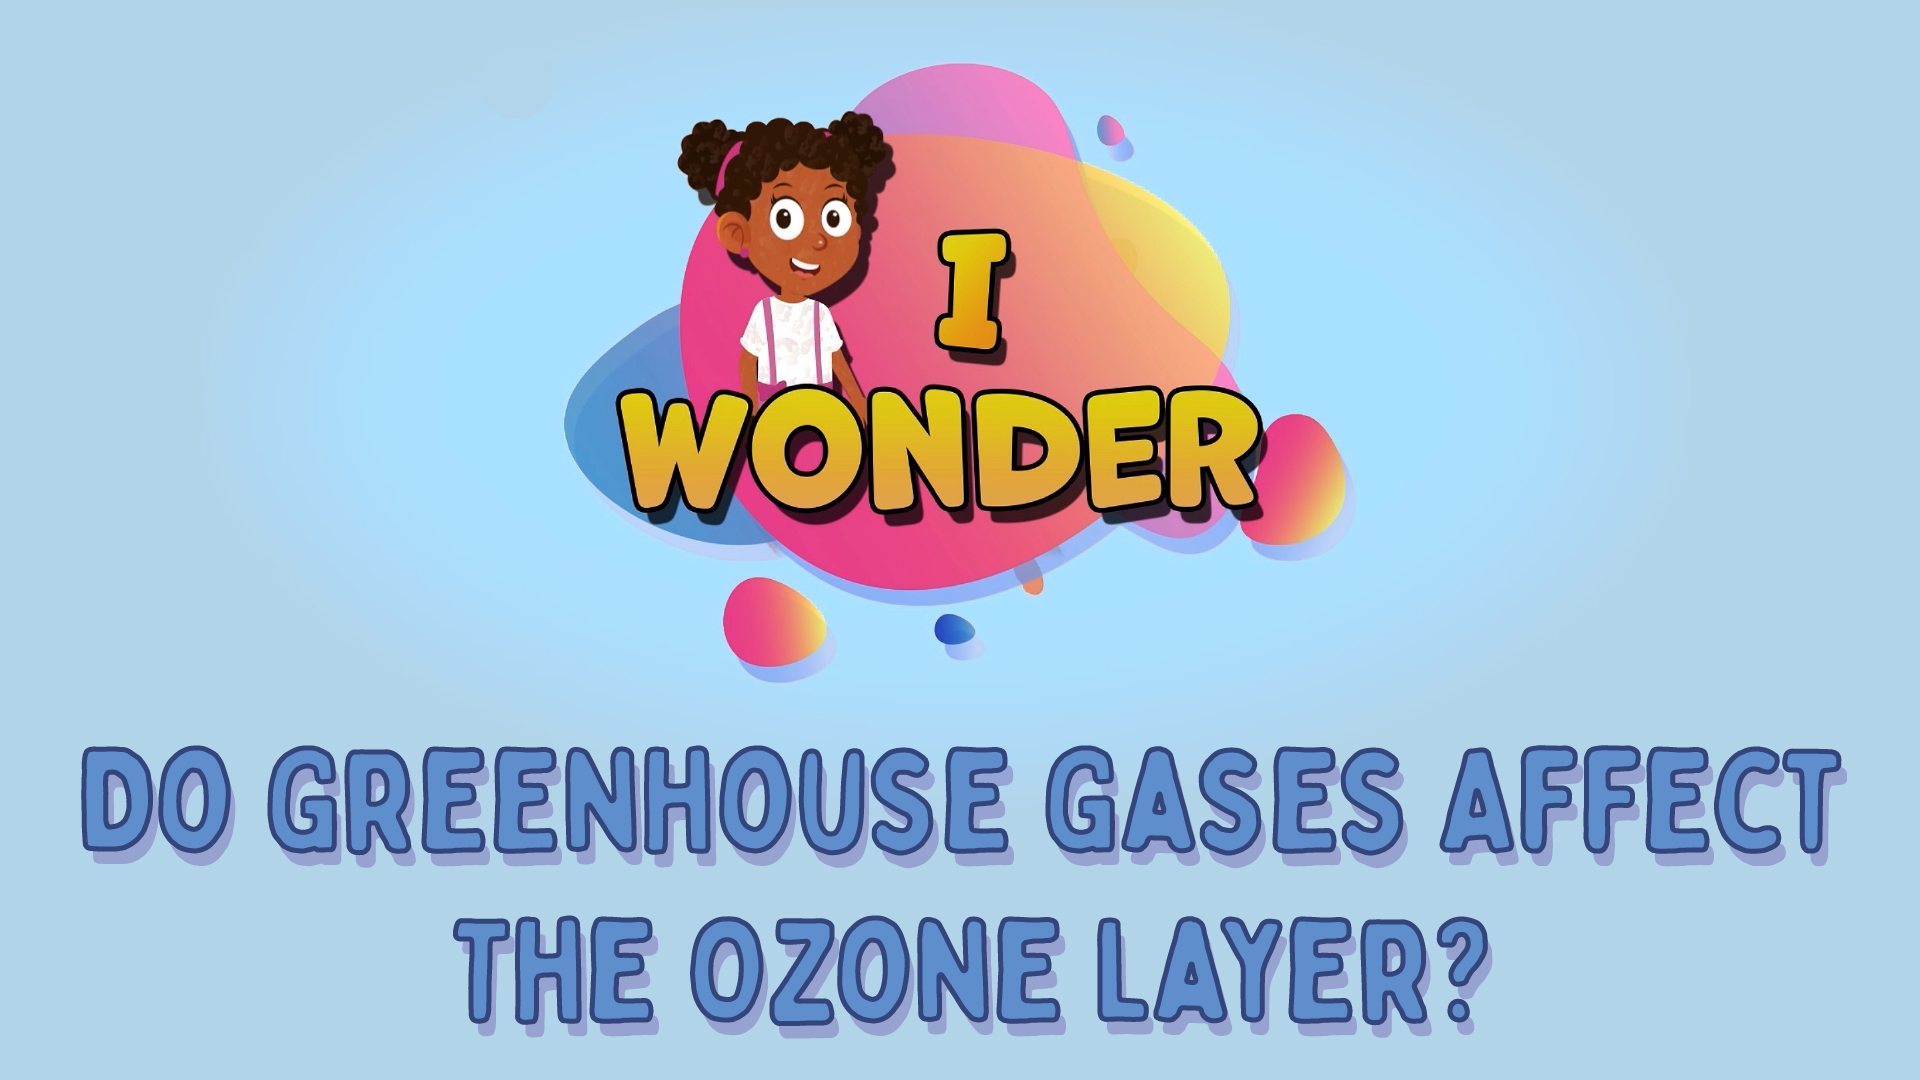 Do Greenhouse Gases Affect The Ozone Layer?